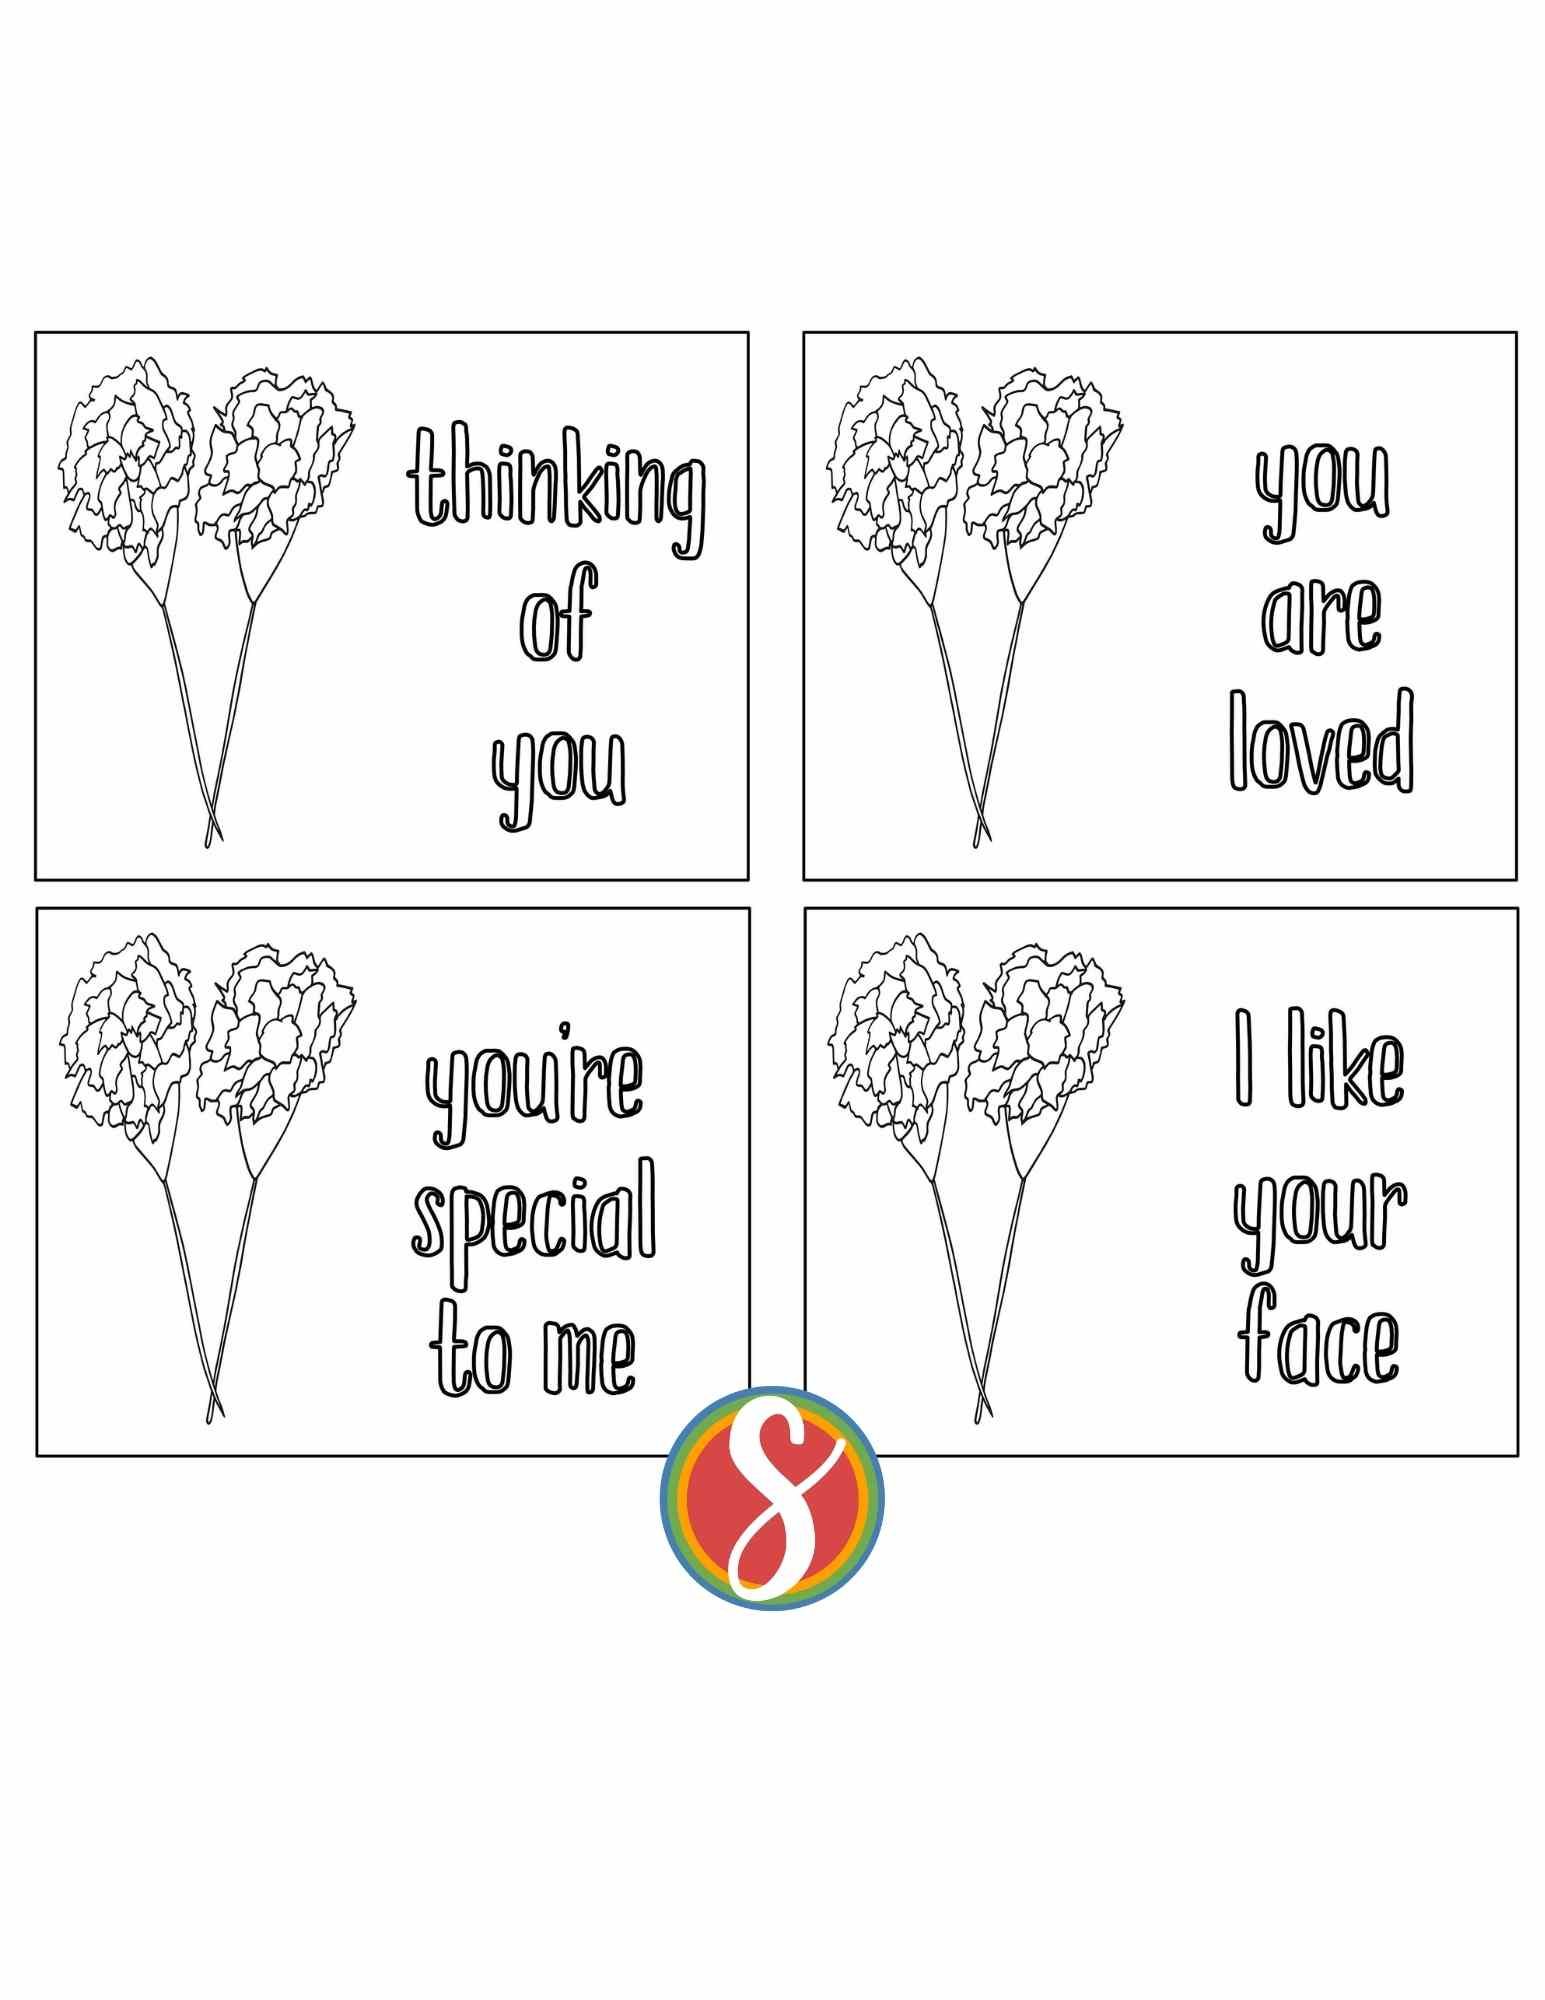 4 carnation cards with 2 carnations on each card